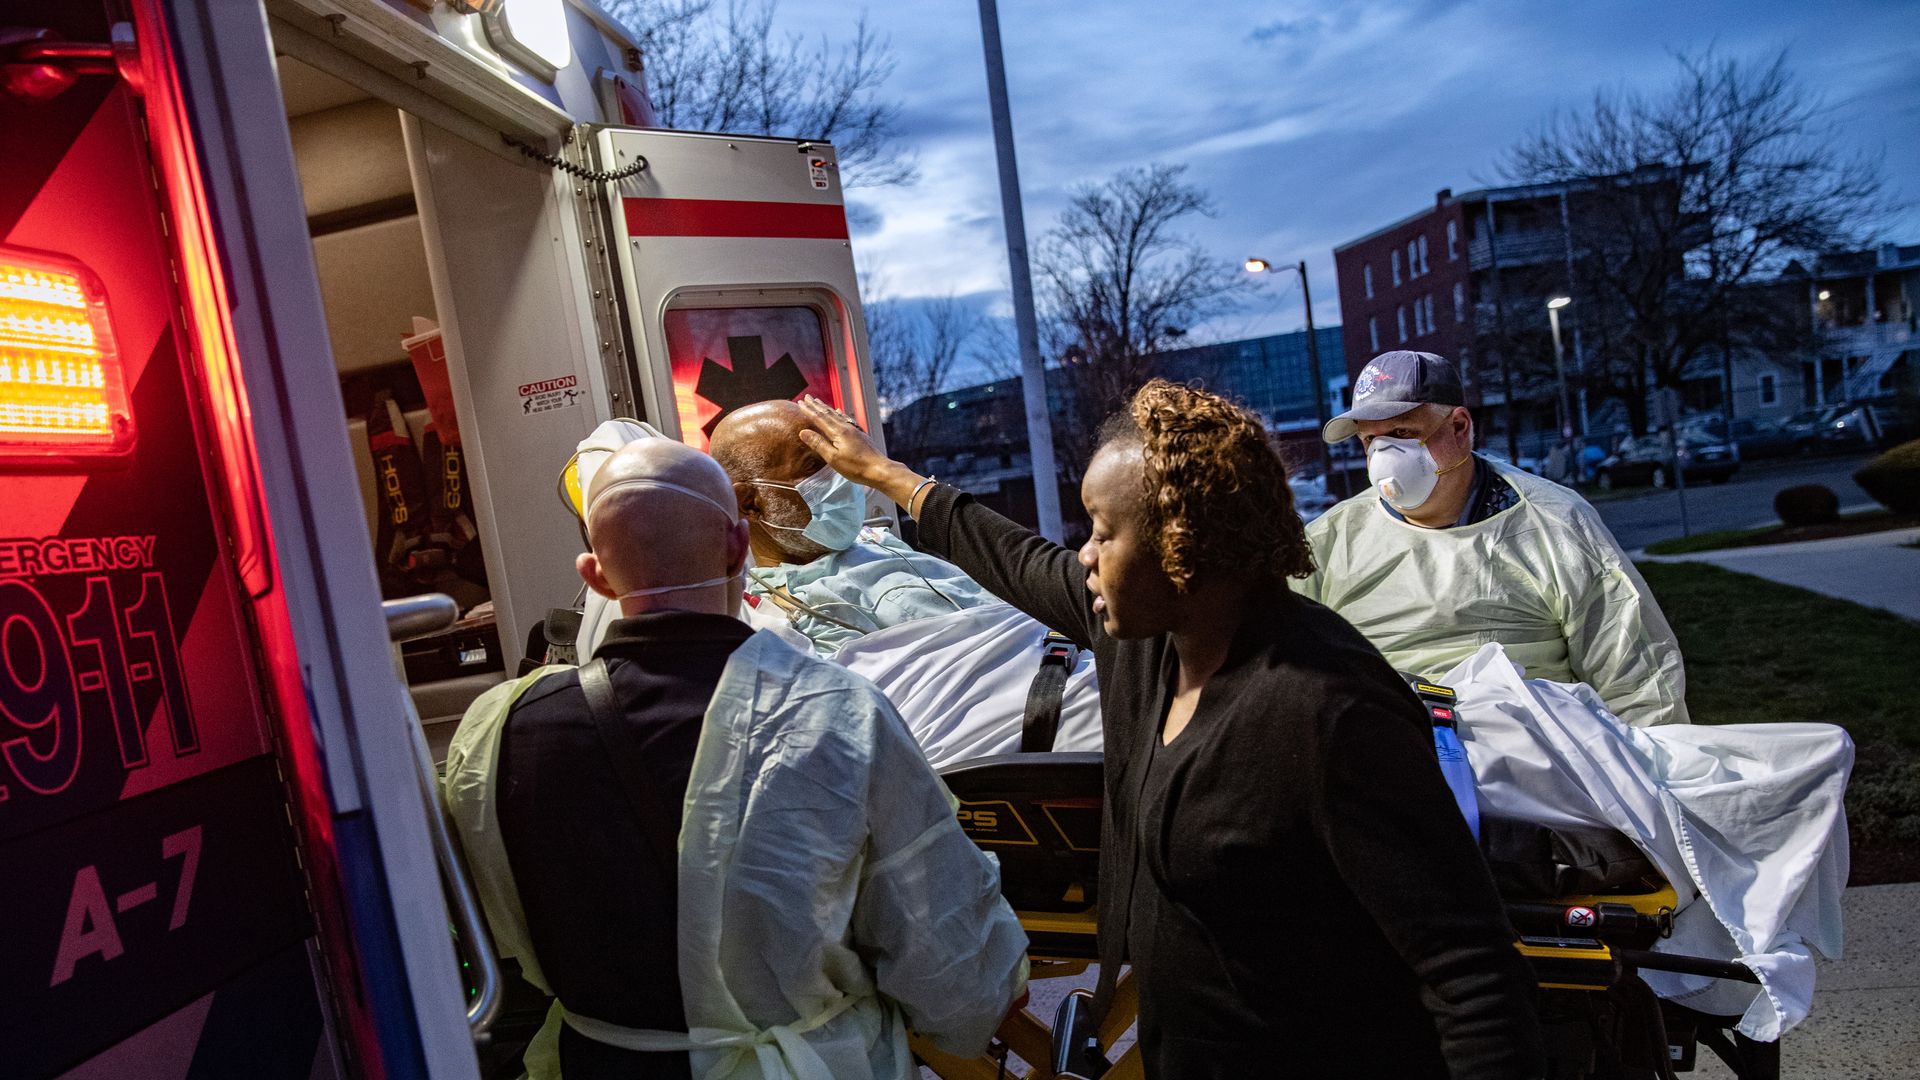 In this image, a woman touches a mans' head as he is carried into an ambulance on a stretcher